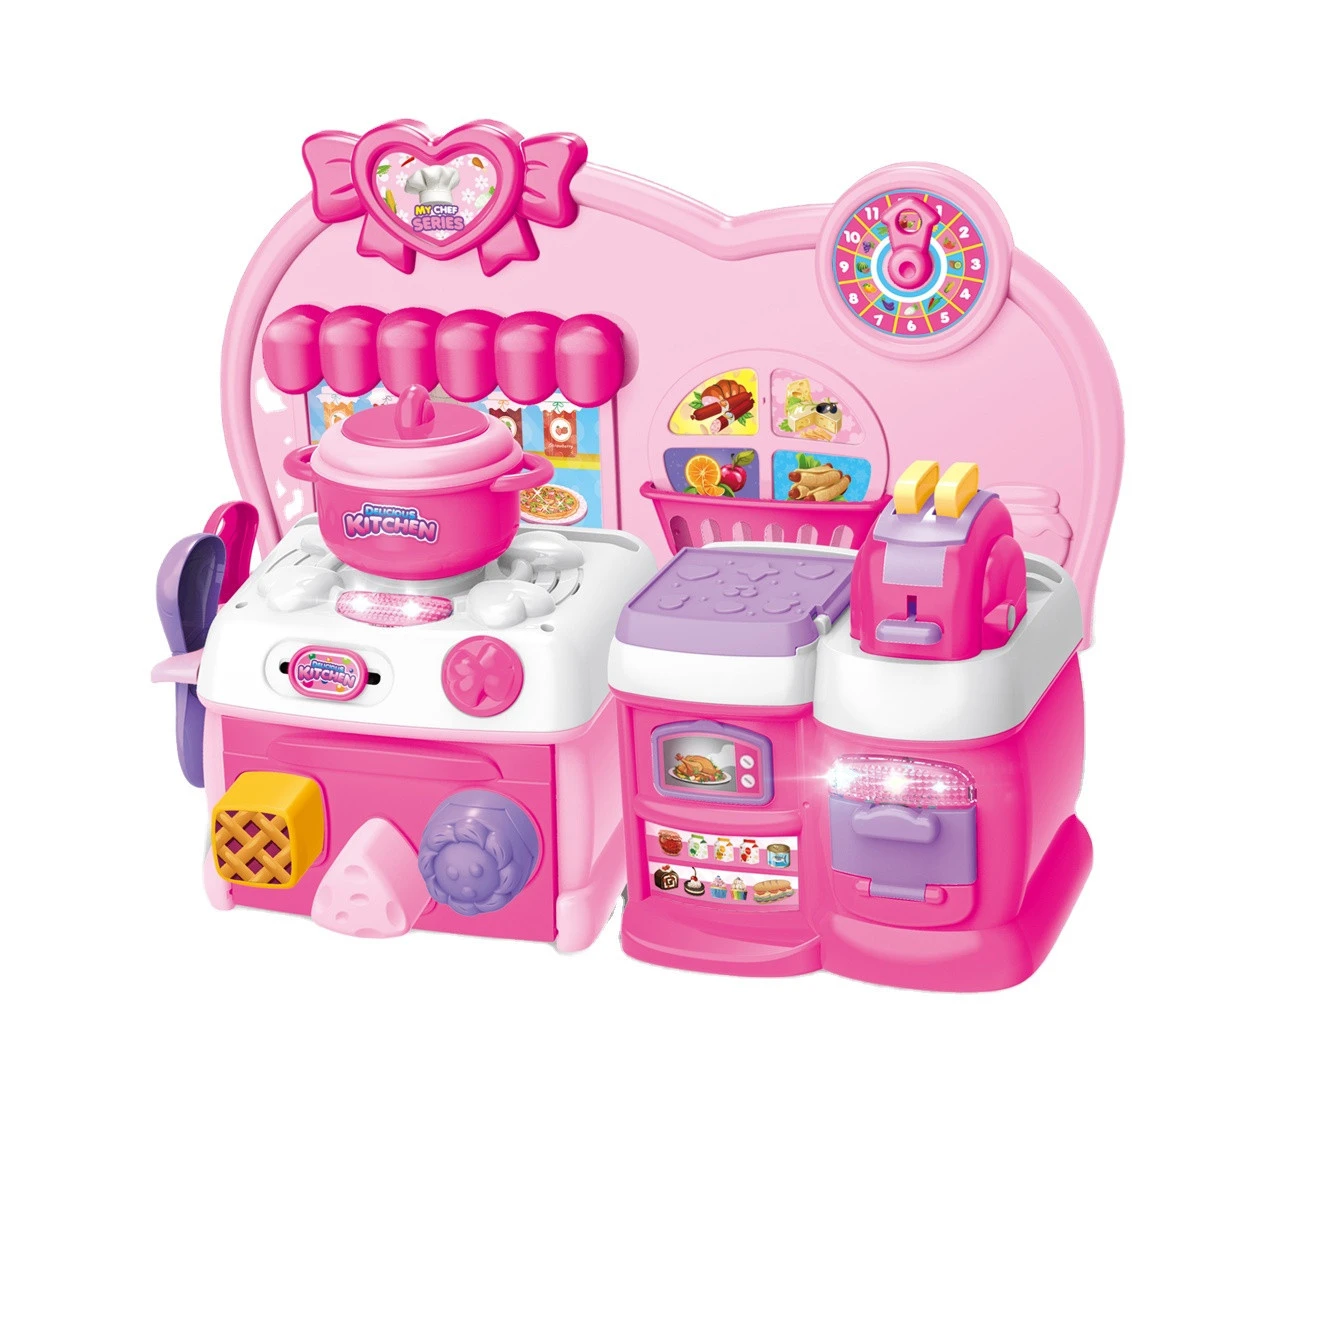 New hot sale pink kitchen set kids kitchen set toys with boiler and bread maker for child